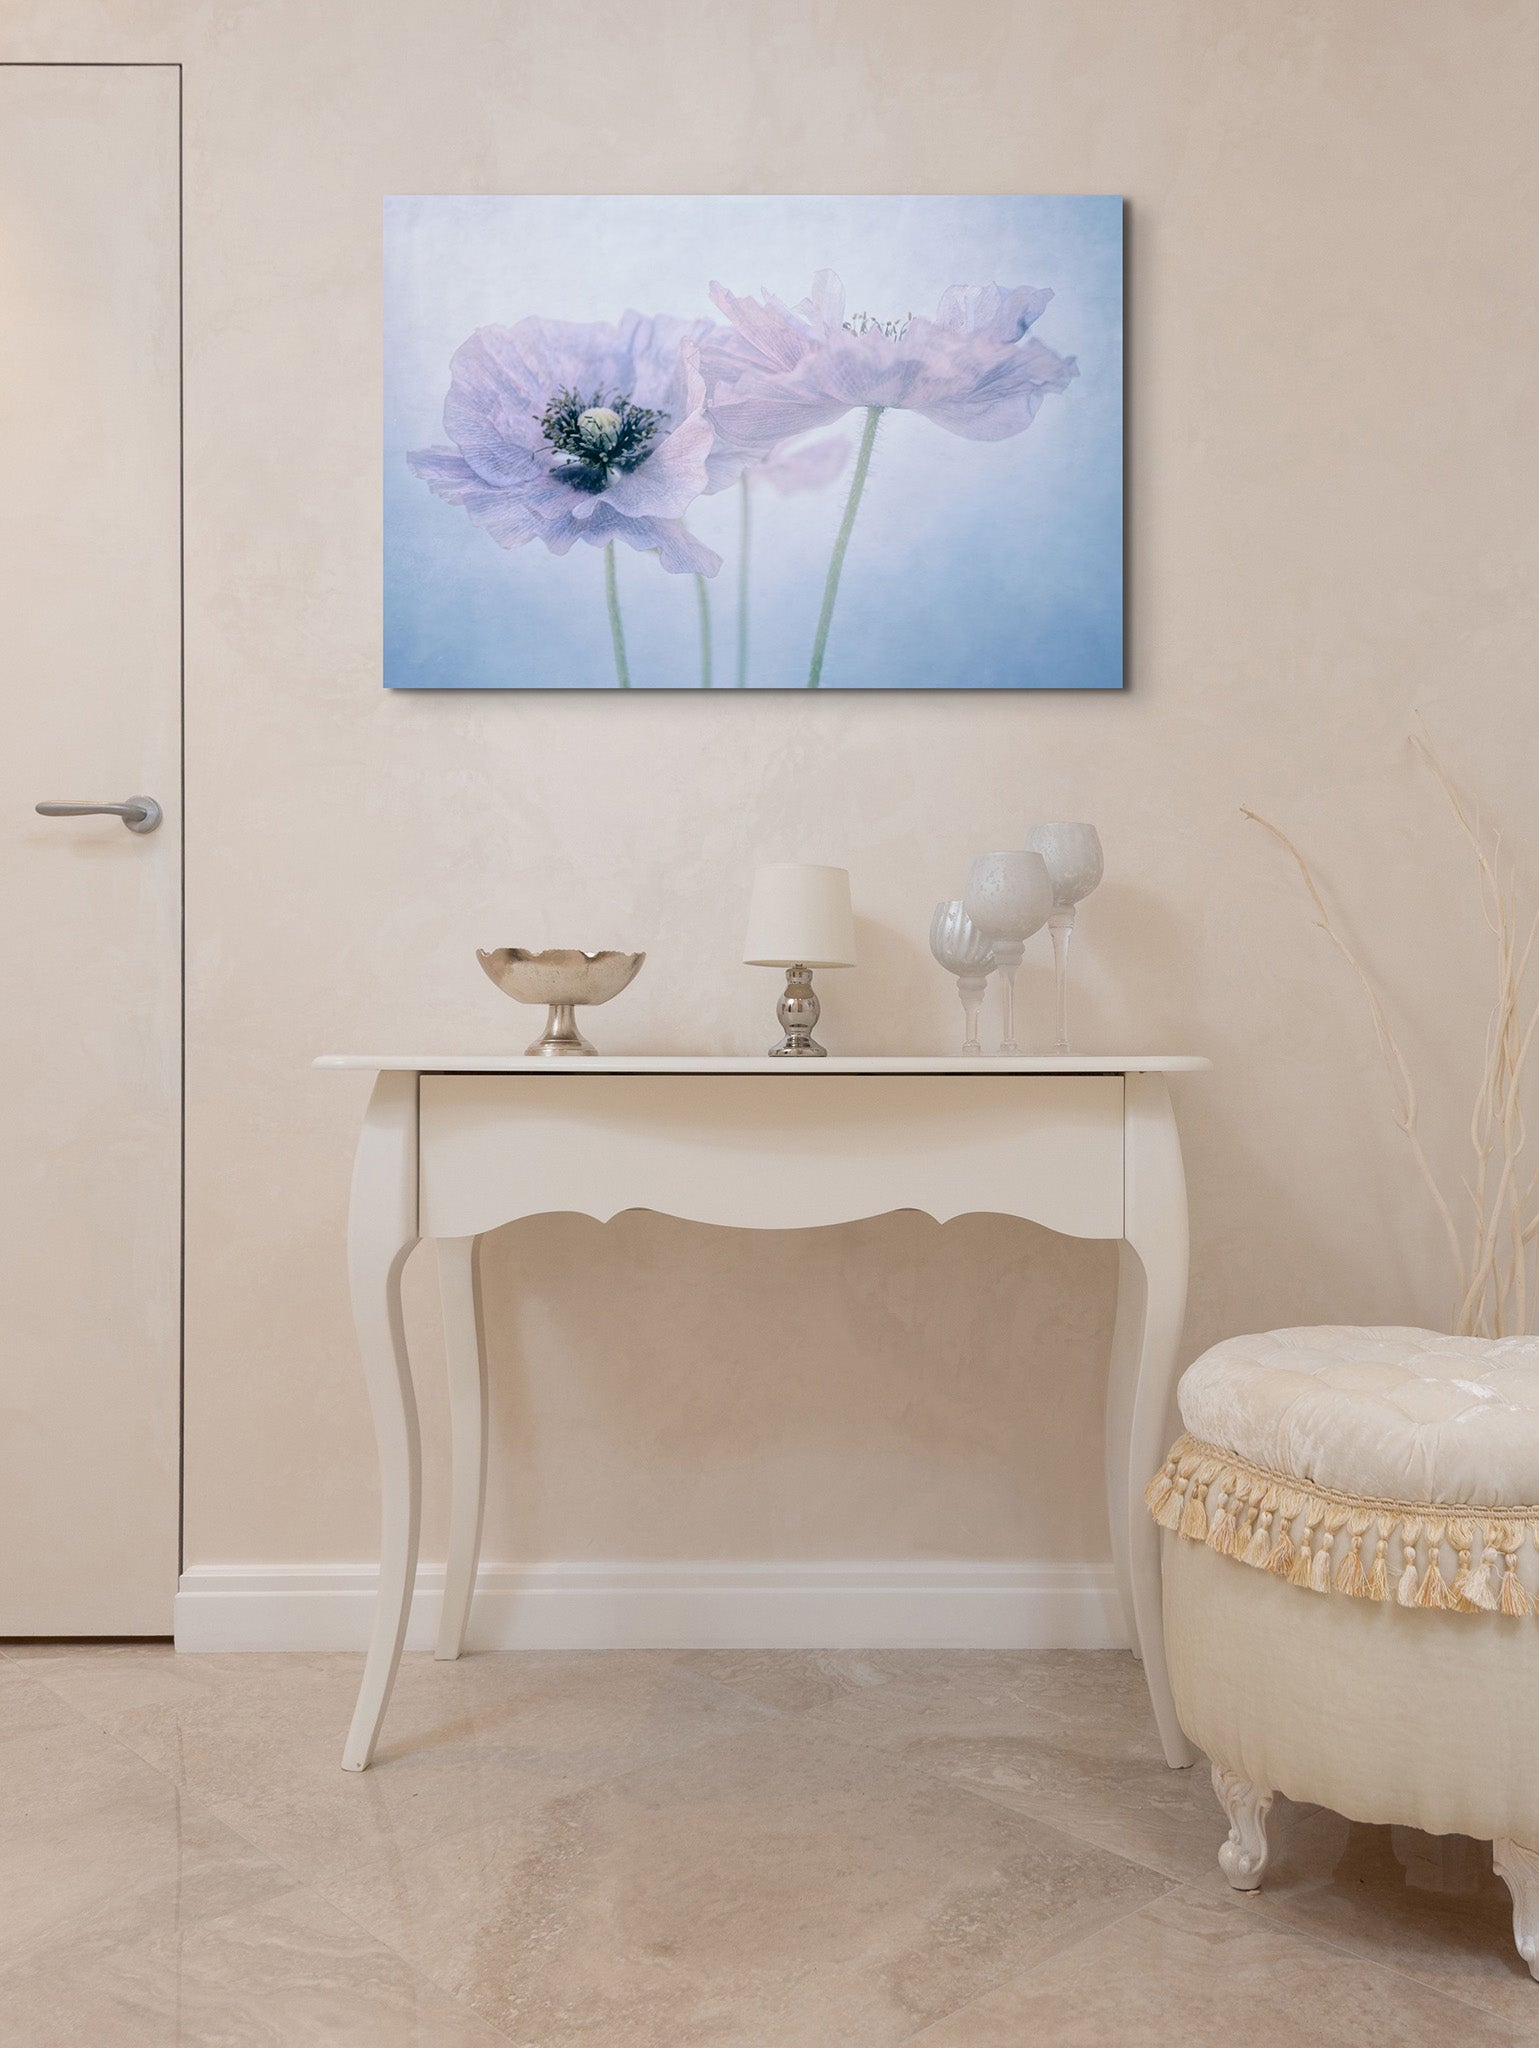 A picture on wall over a vanity.  The picture is a fine art flower photograph by Cameron Dreaux. of 3 pastel-colored poppies. 